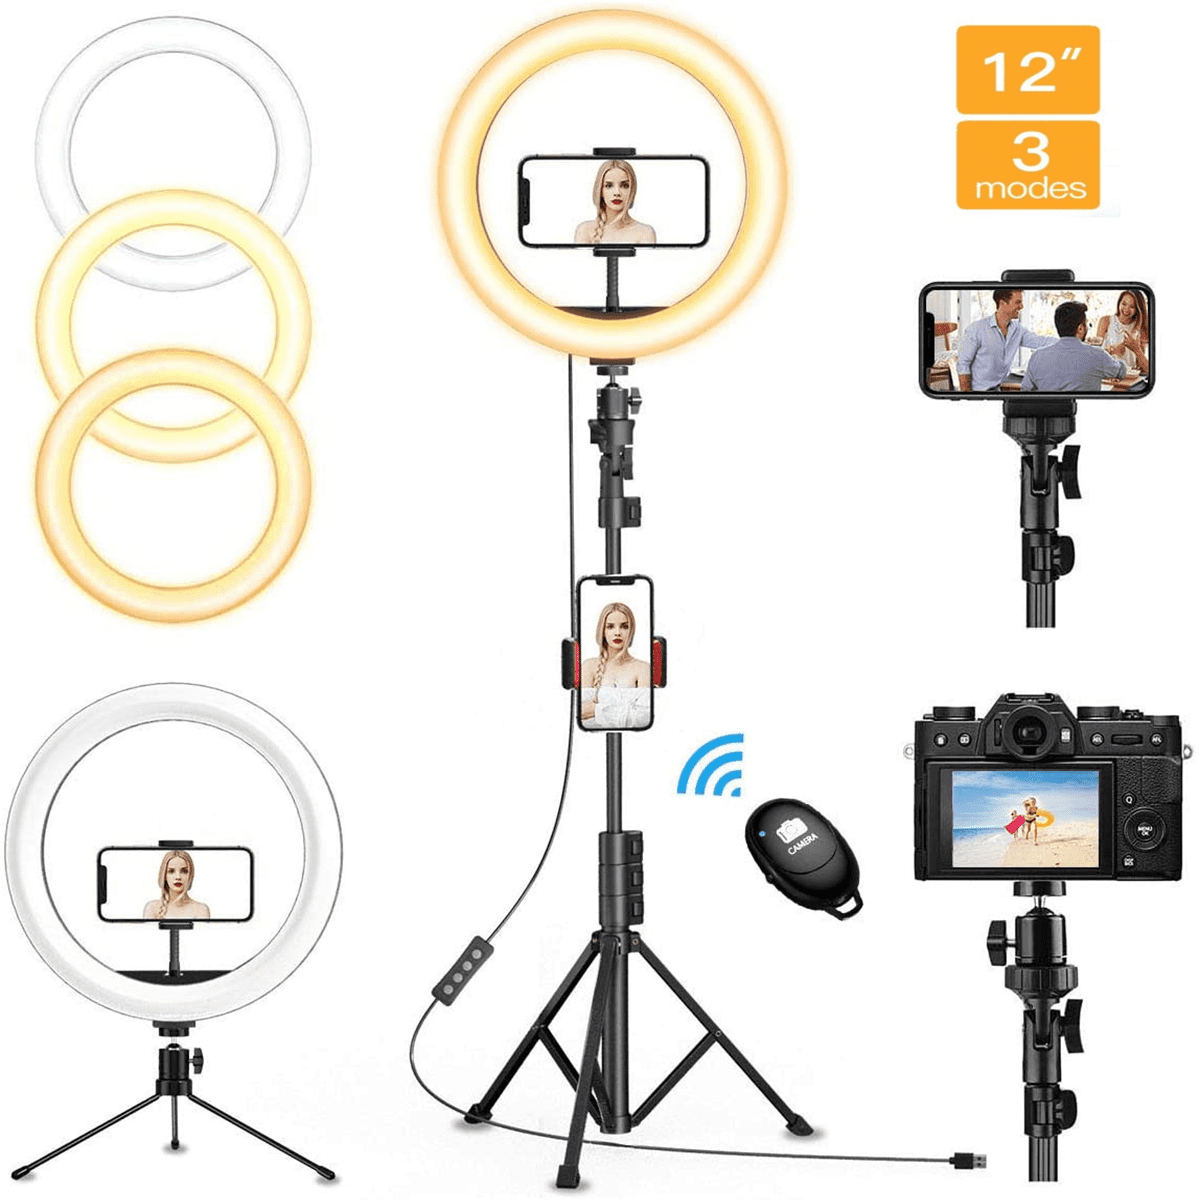 10 Inch Ring Light with Tripod Stand and Phone Holder Photography,Live Steaming & Photo,3 Light Modes & 10 Brightness Level. Selfie Ring Light for Makeup,YouTube Video